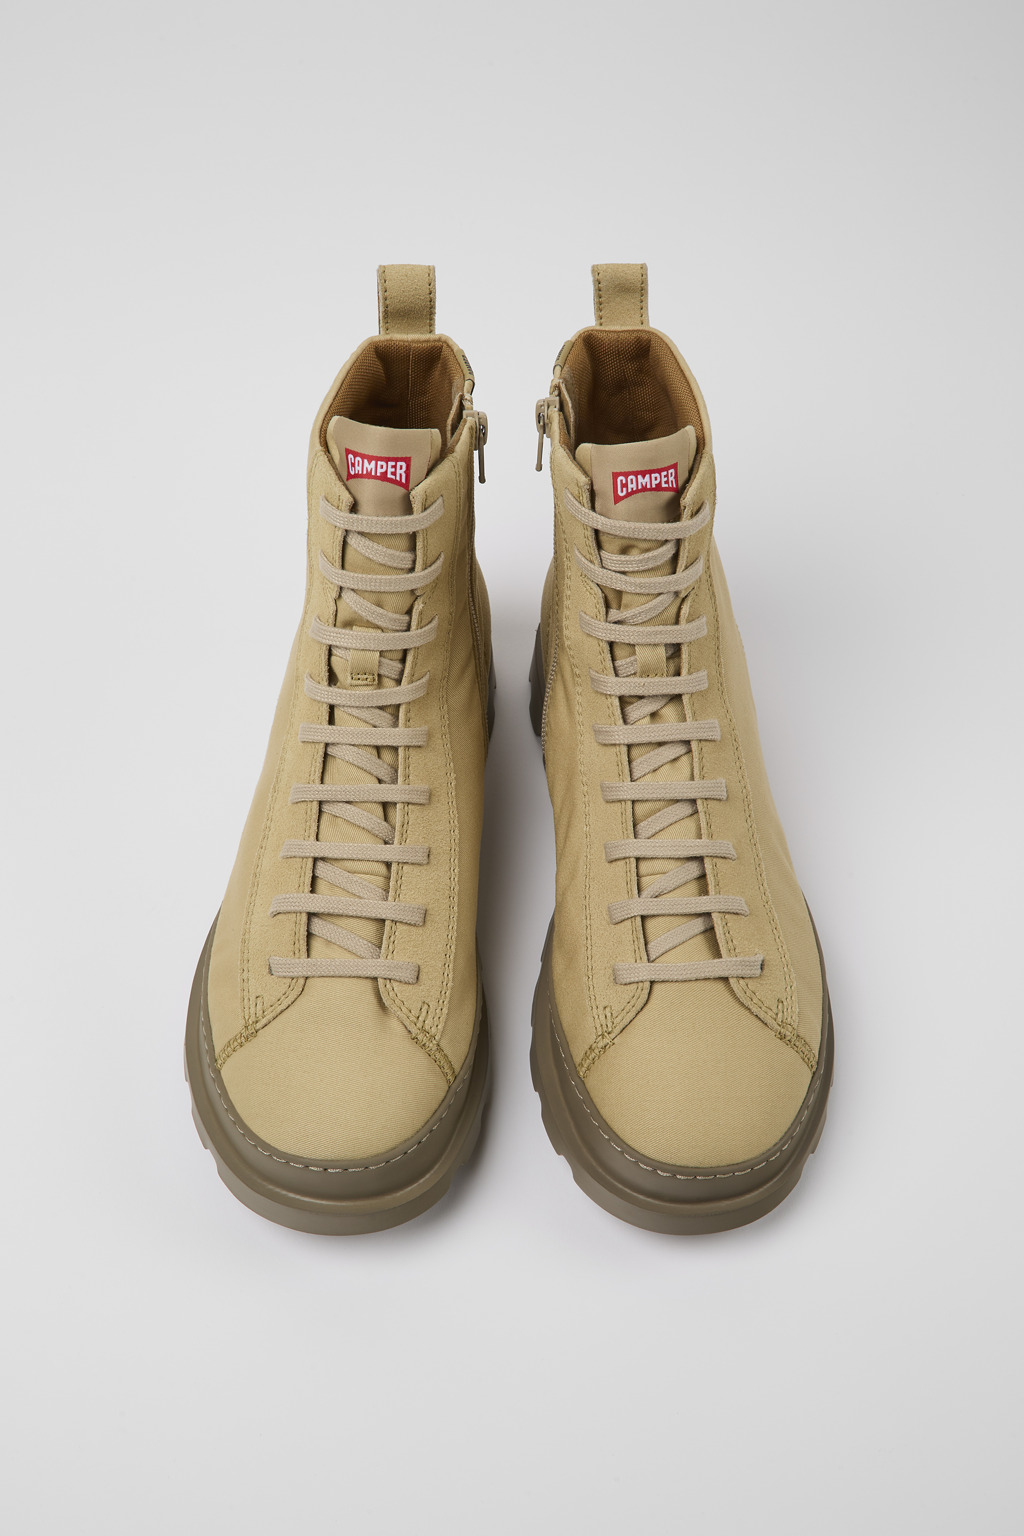 Brutus Beige Ankle Boots for Men - Fall/Winter collection - Camper 